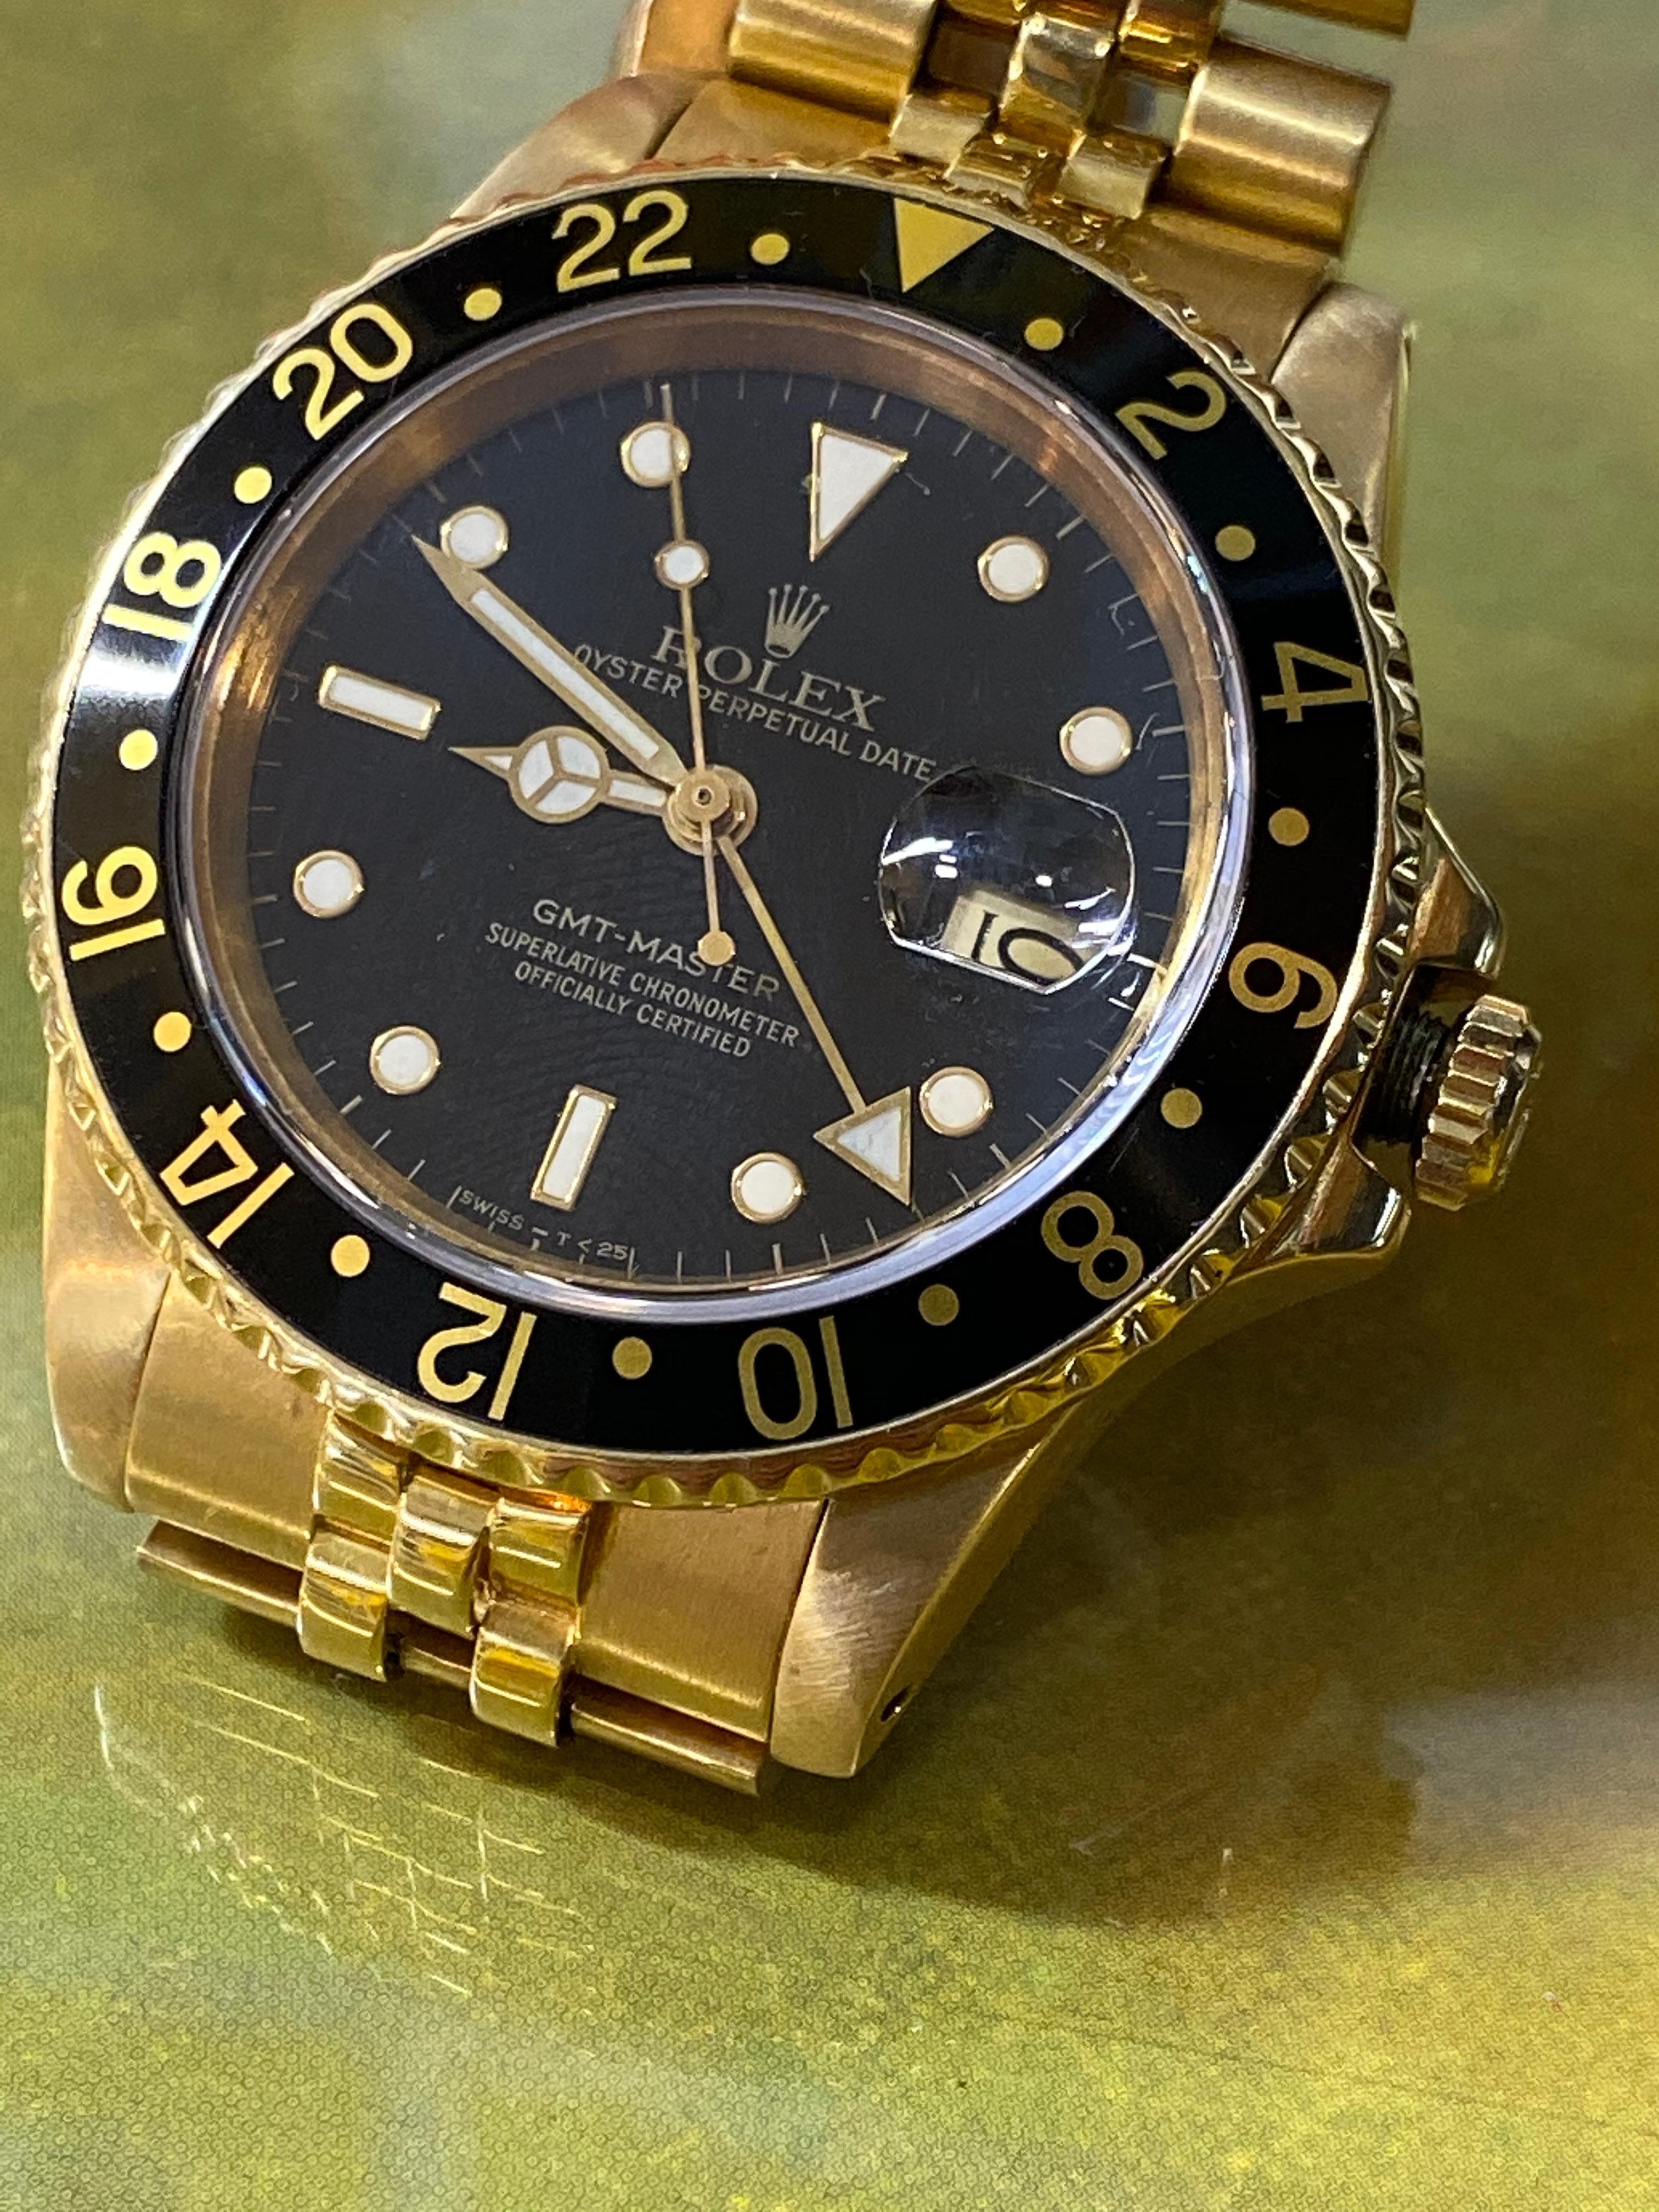 ROLEX GMT MASTER REF. #16758 18K YG W/ BLACK BEZEL AND DIAL RARE VINTAGE 1981 MODEL

ITEM DESCRIPTION: 
The Rolex GMT is the jet-setting icon of the Rolex sports watch family. The history of this sophisticated, versatile style dates back to 1954